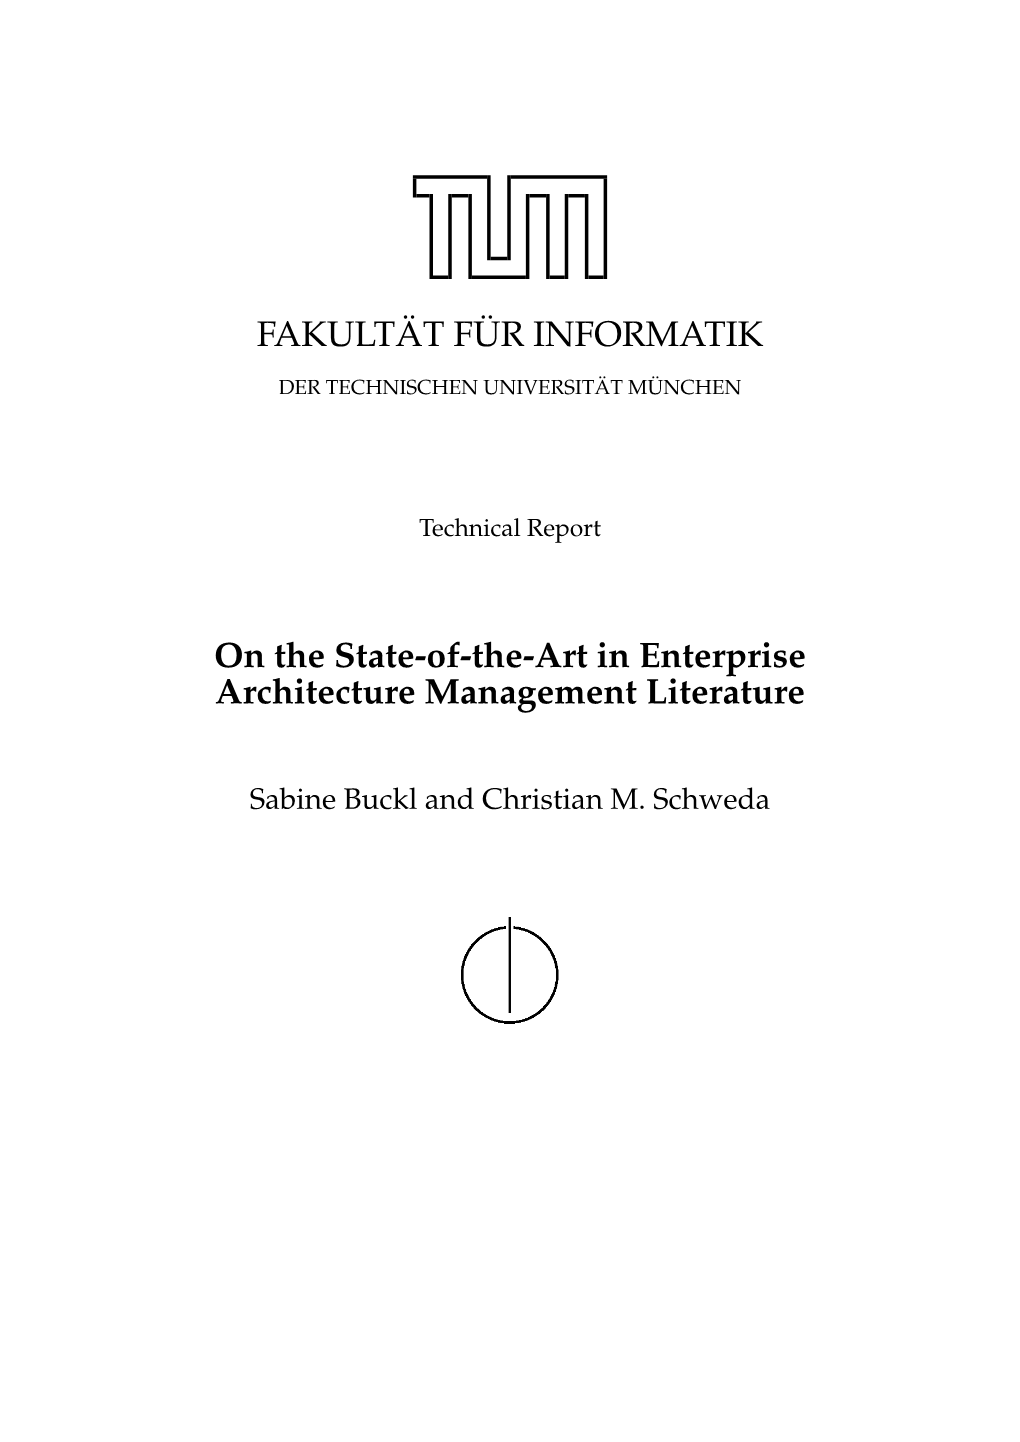 On the State-Of-The-Art in Enterprise Architecture Management Literature